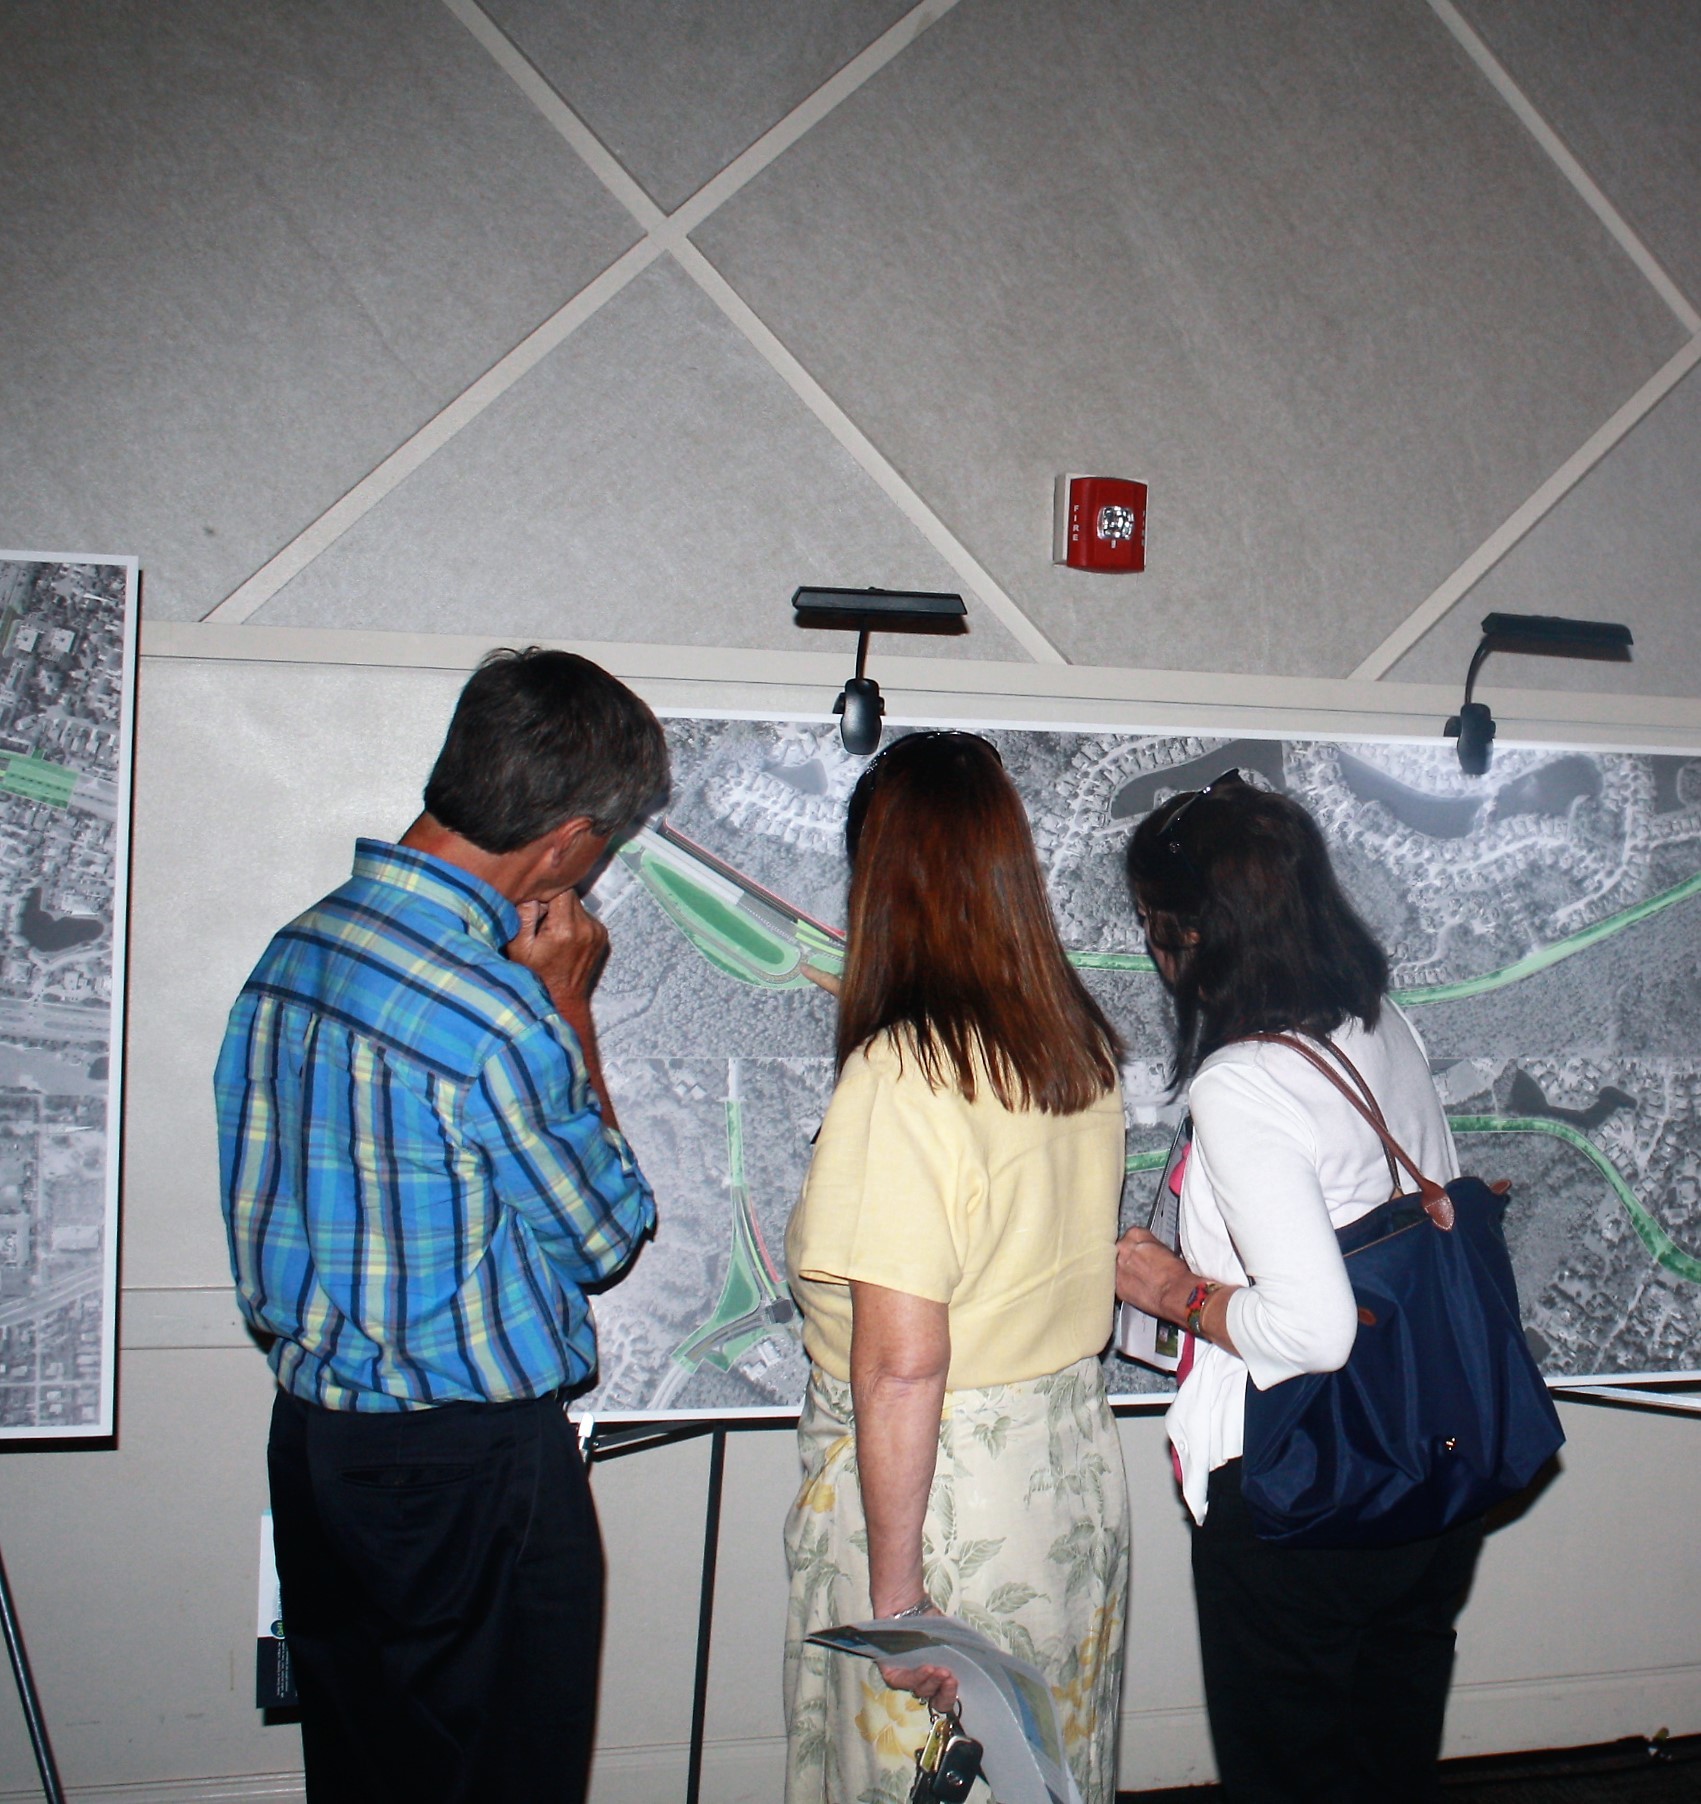 Residents review Ponte Vedra and Palm Valley traffic improvements proposed in a draft study by the North Florida Transportation Planning Organization presented Tuesday evening at a standing-room-only meeting held at the Ponte Vedra Concert Hall.